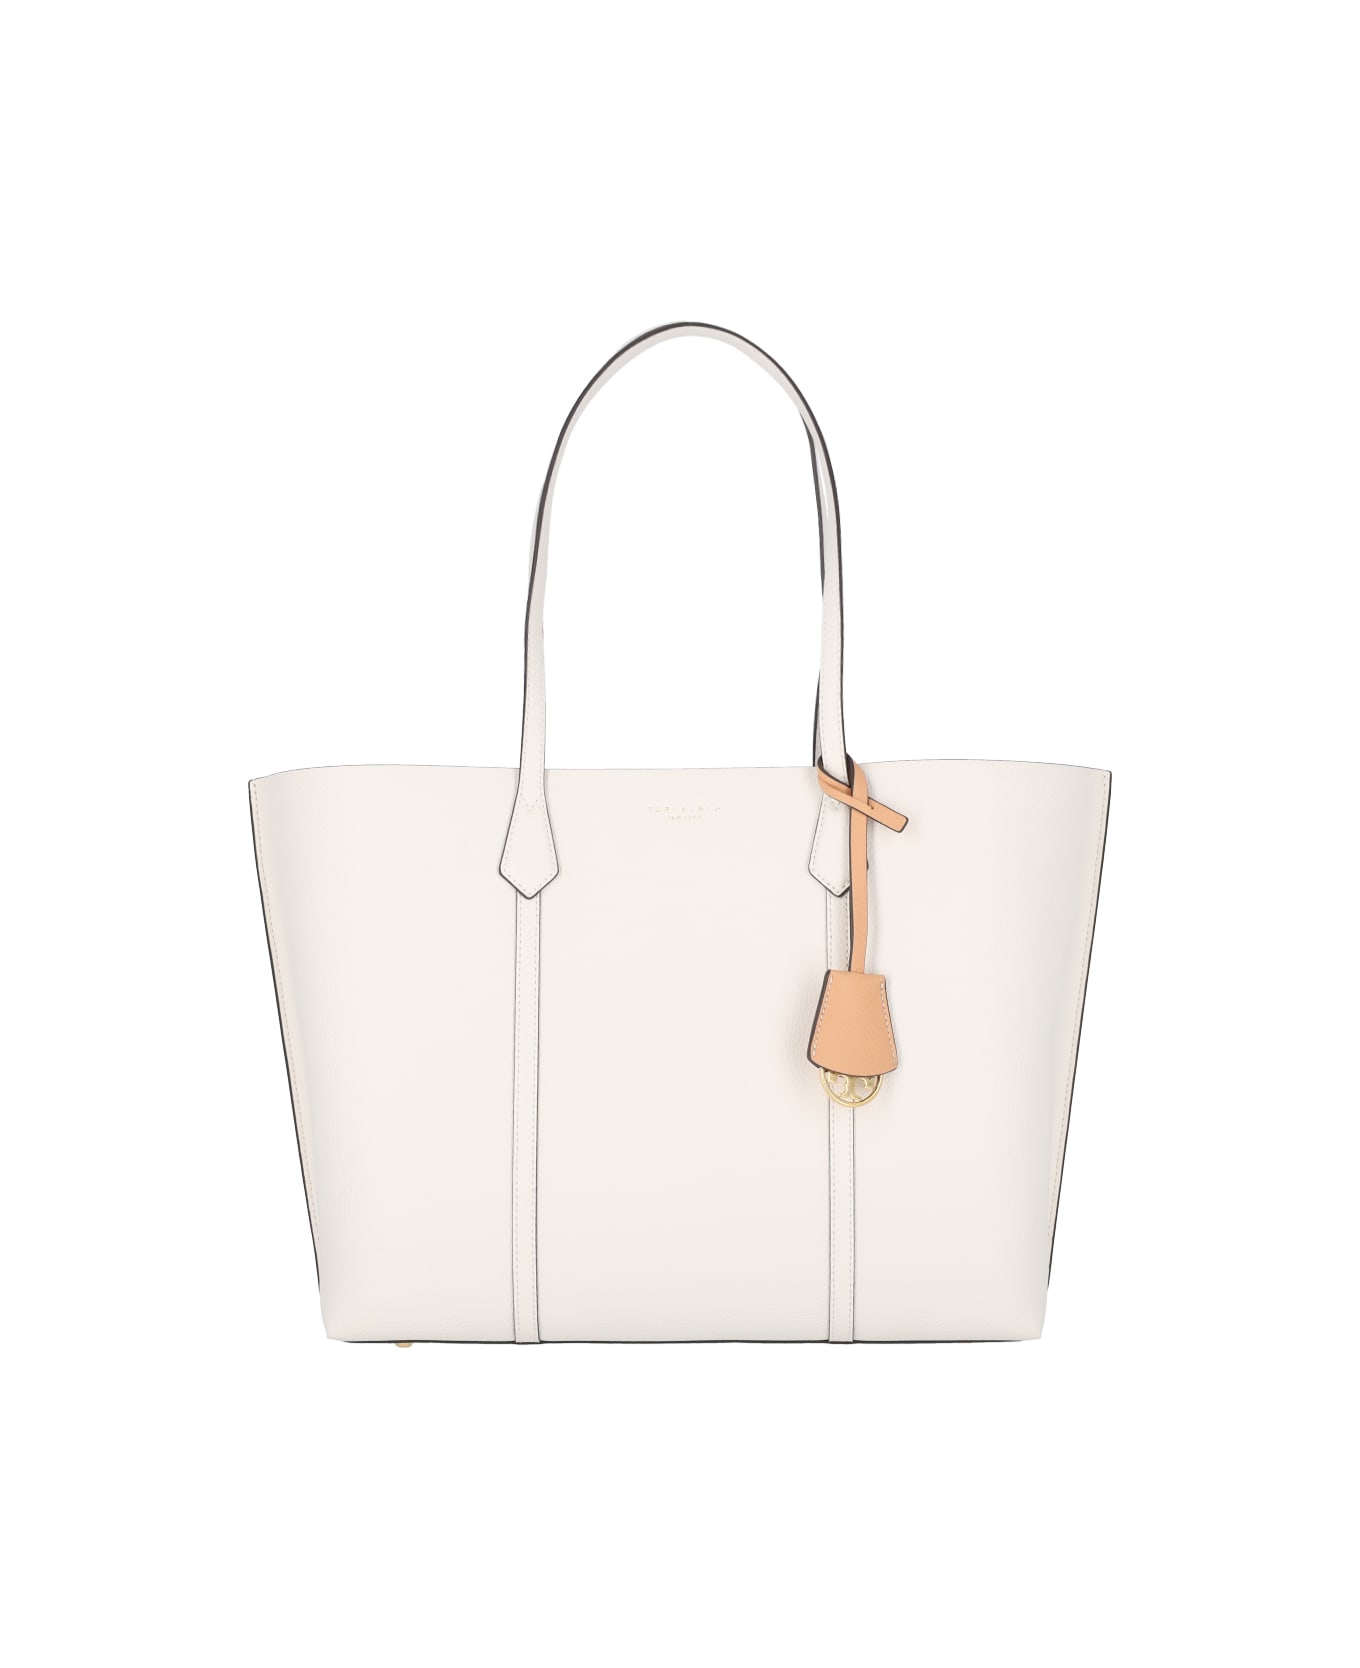 Tory Burch 'perry' Tote Bag - Crema トートバッグ